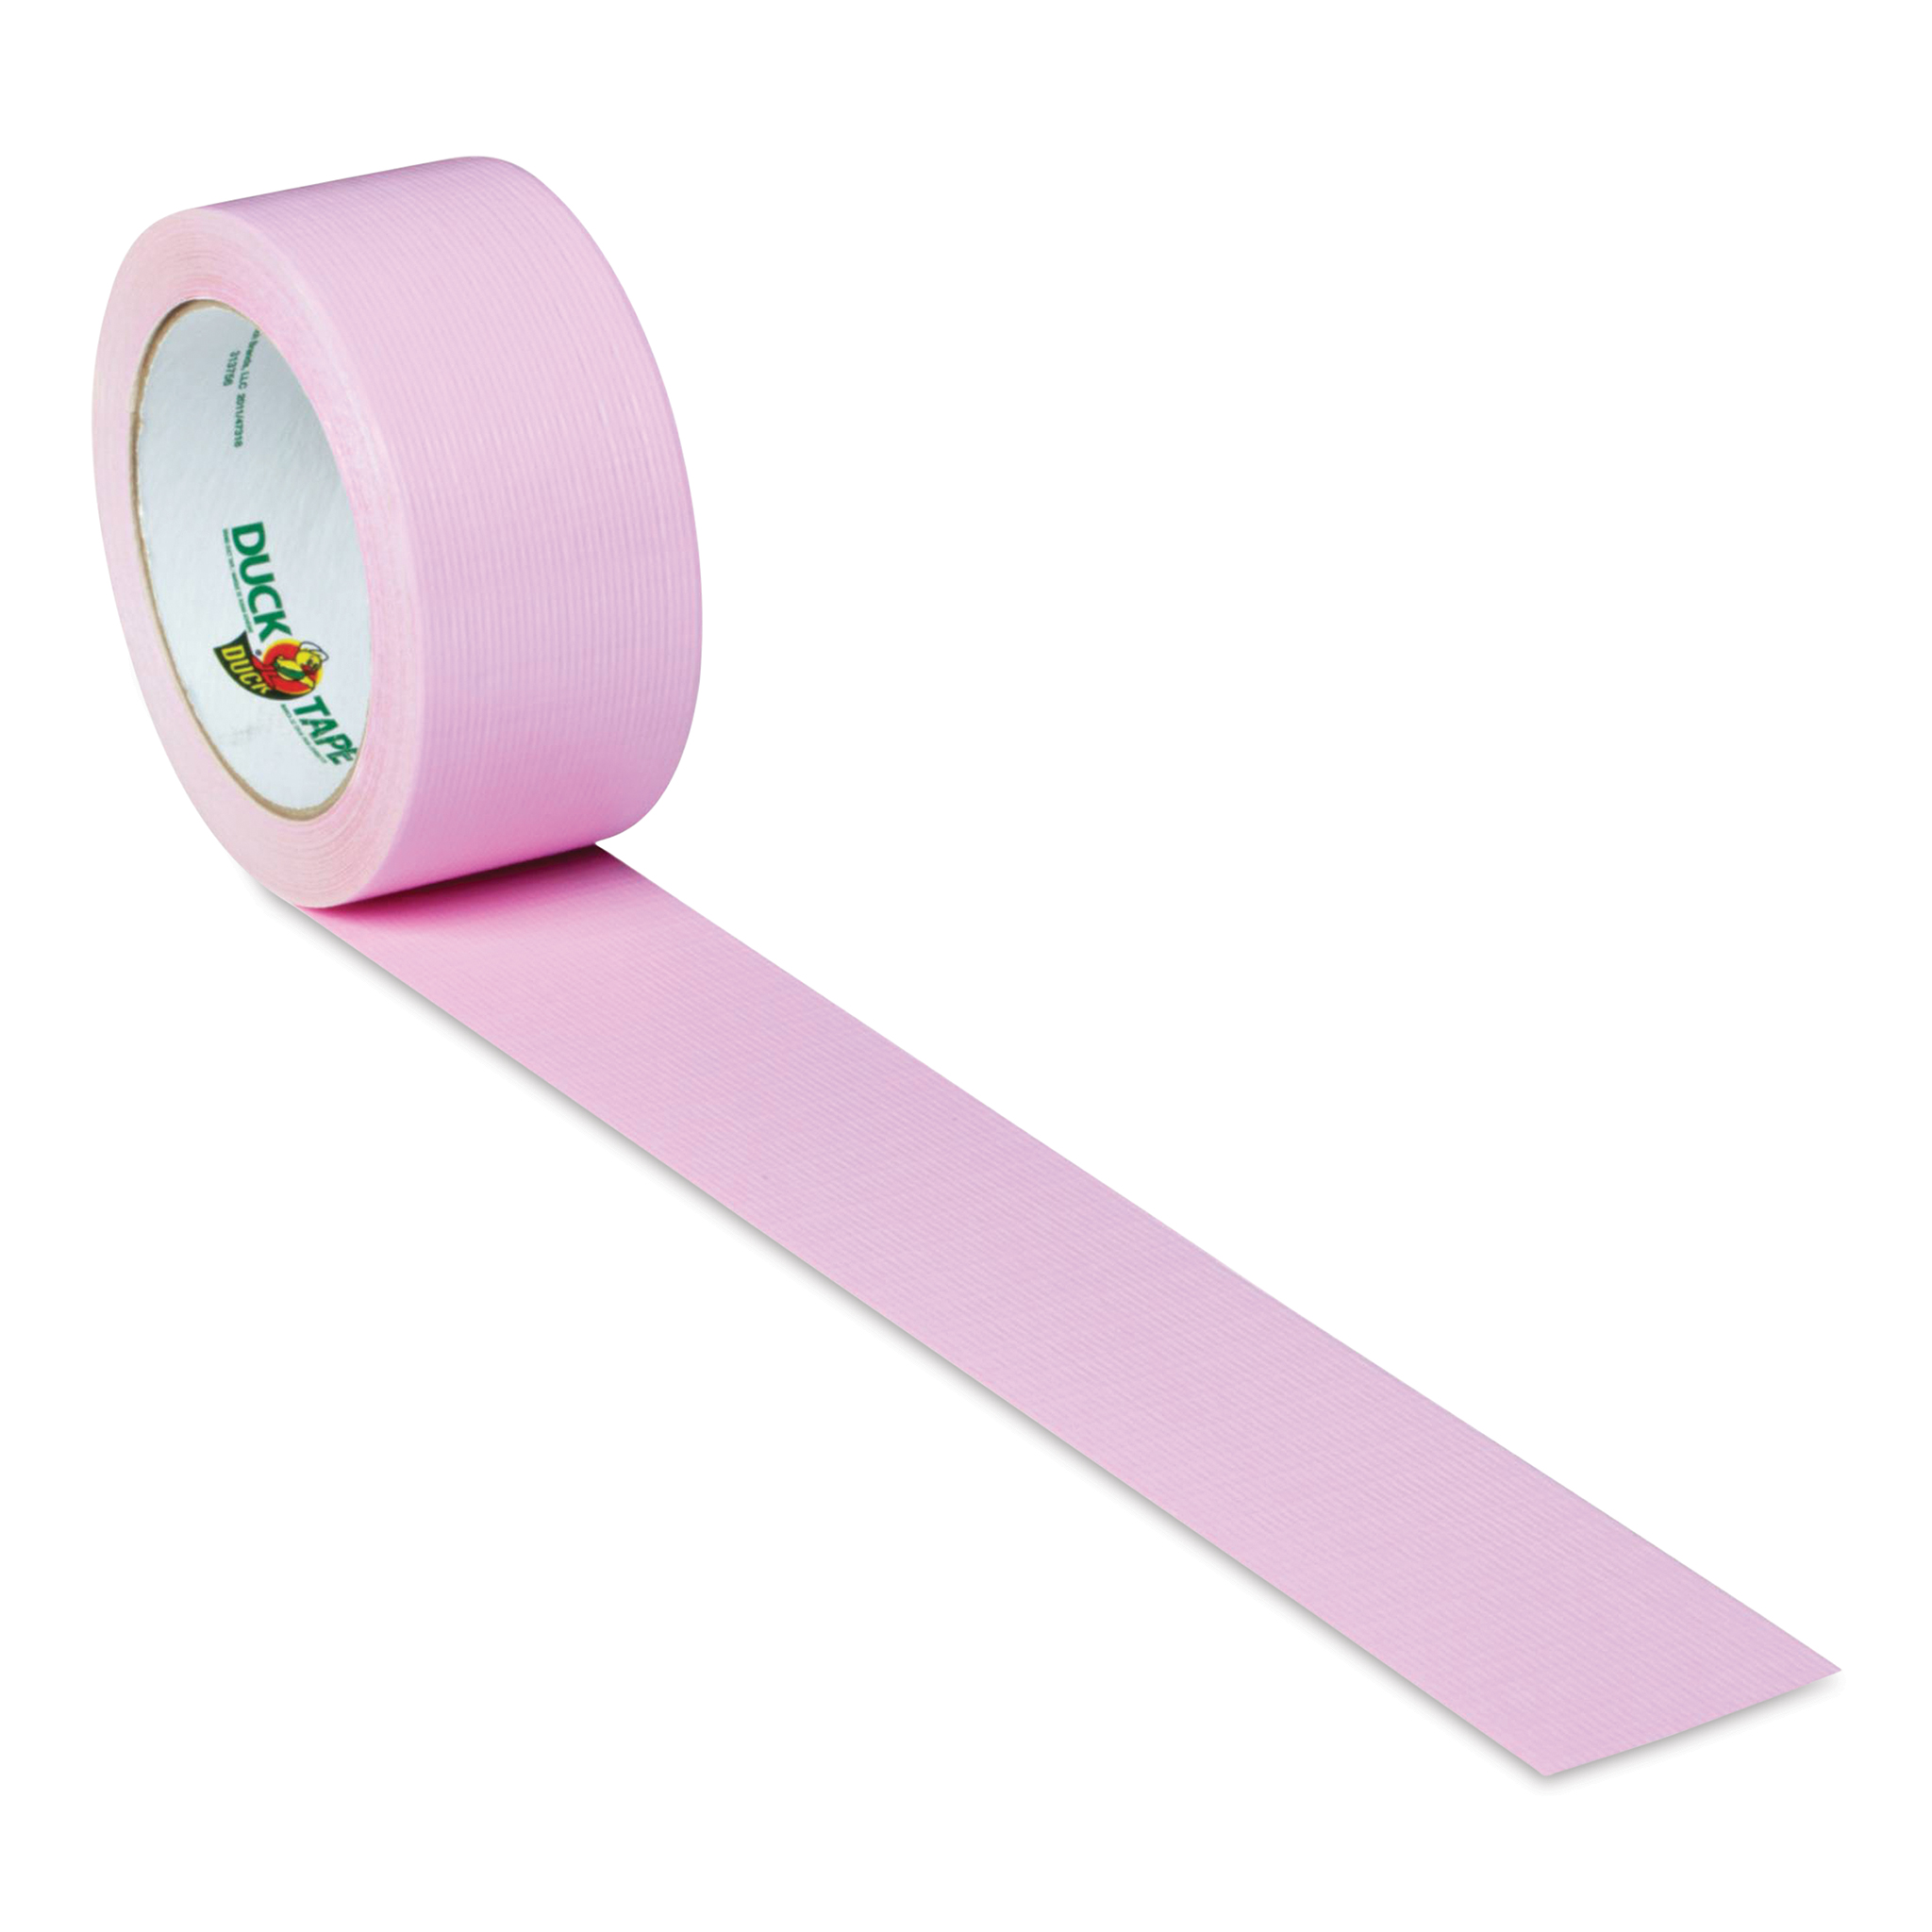 Duck Colored Duct Tape - DUC1398132 